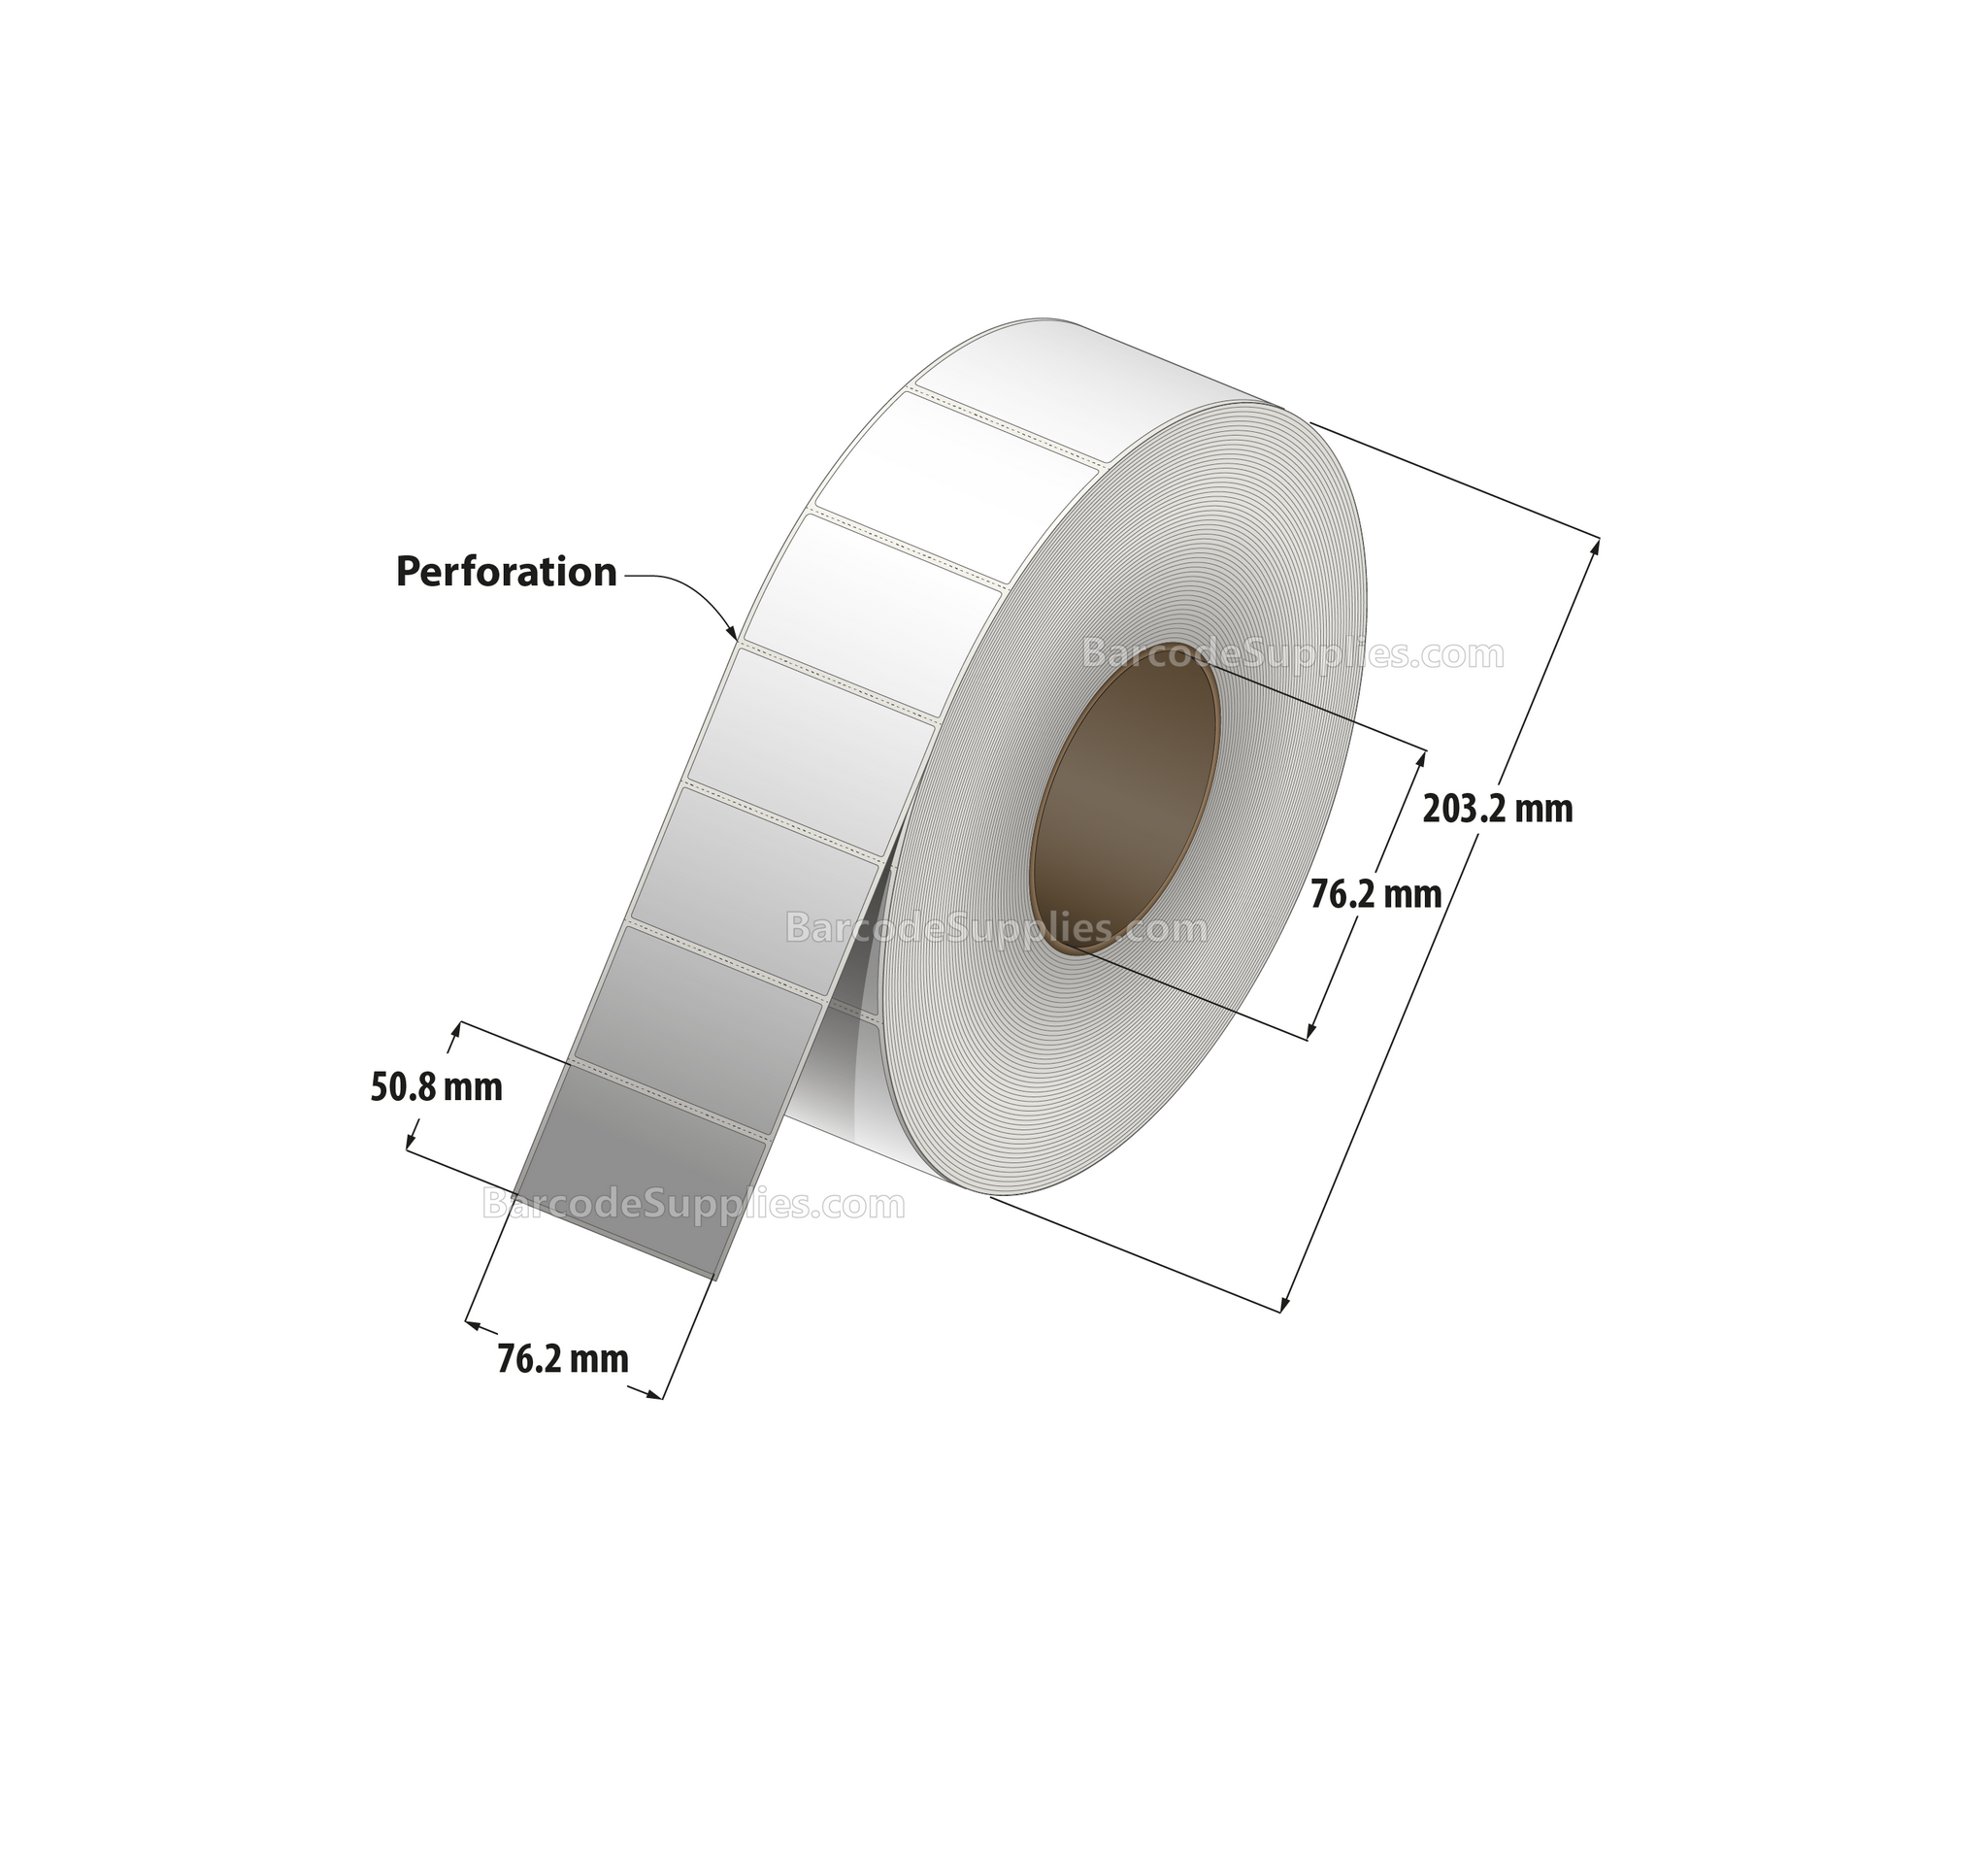 3 x 2 Thermal Transfer White Labels With Permanent Adhesive - Perforated - 3000 Labels Per Roll - Carton Of 8 Rolls - 24000 Labels Total - MPN: RT-3-2-3000-3